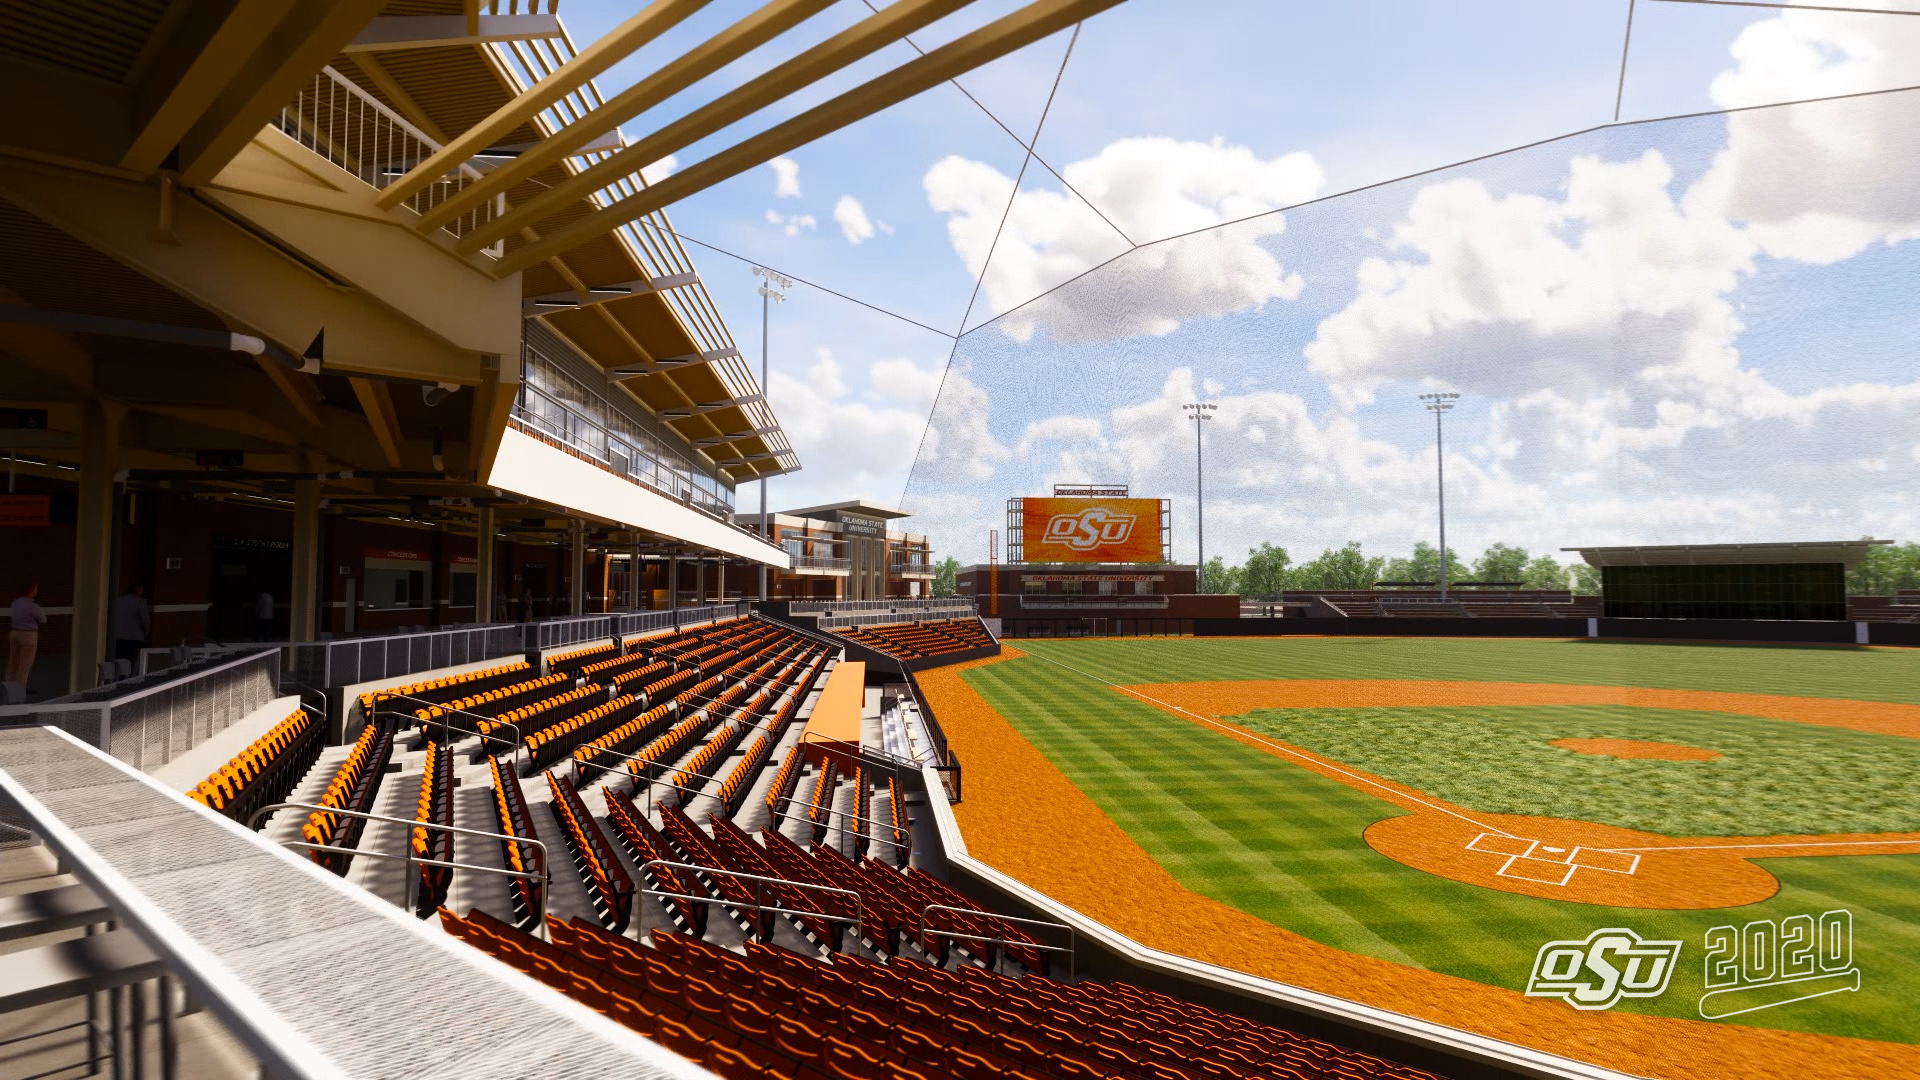 Oklahoma State Unveils New Ballpark Project for 2020 Ballpark Digest